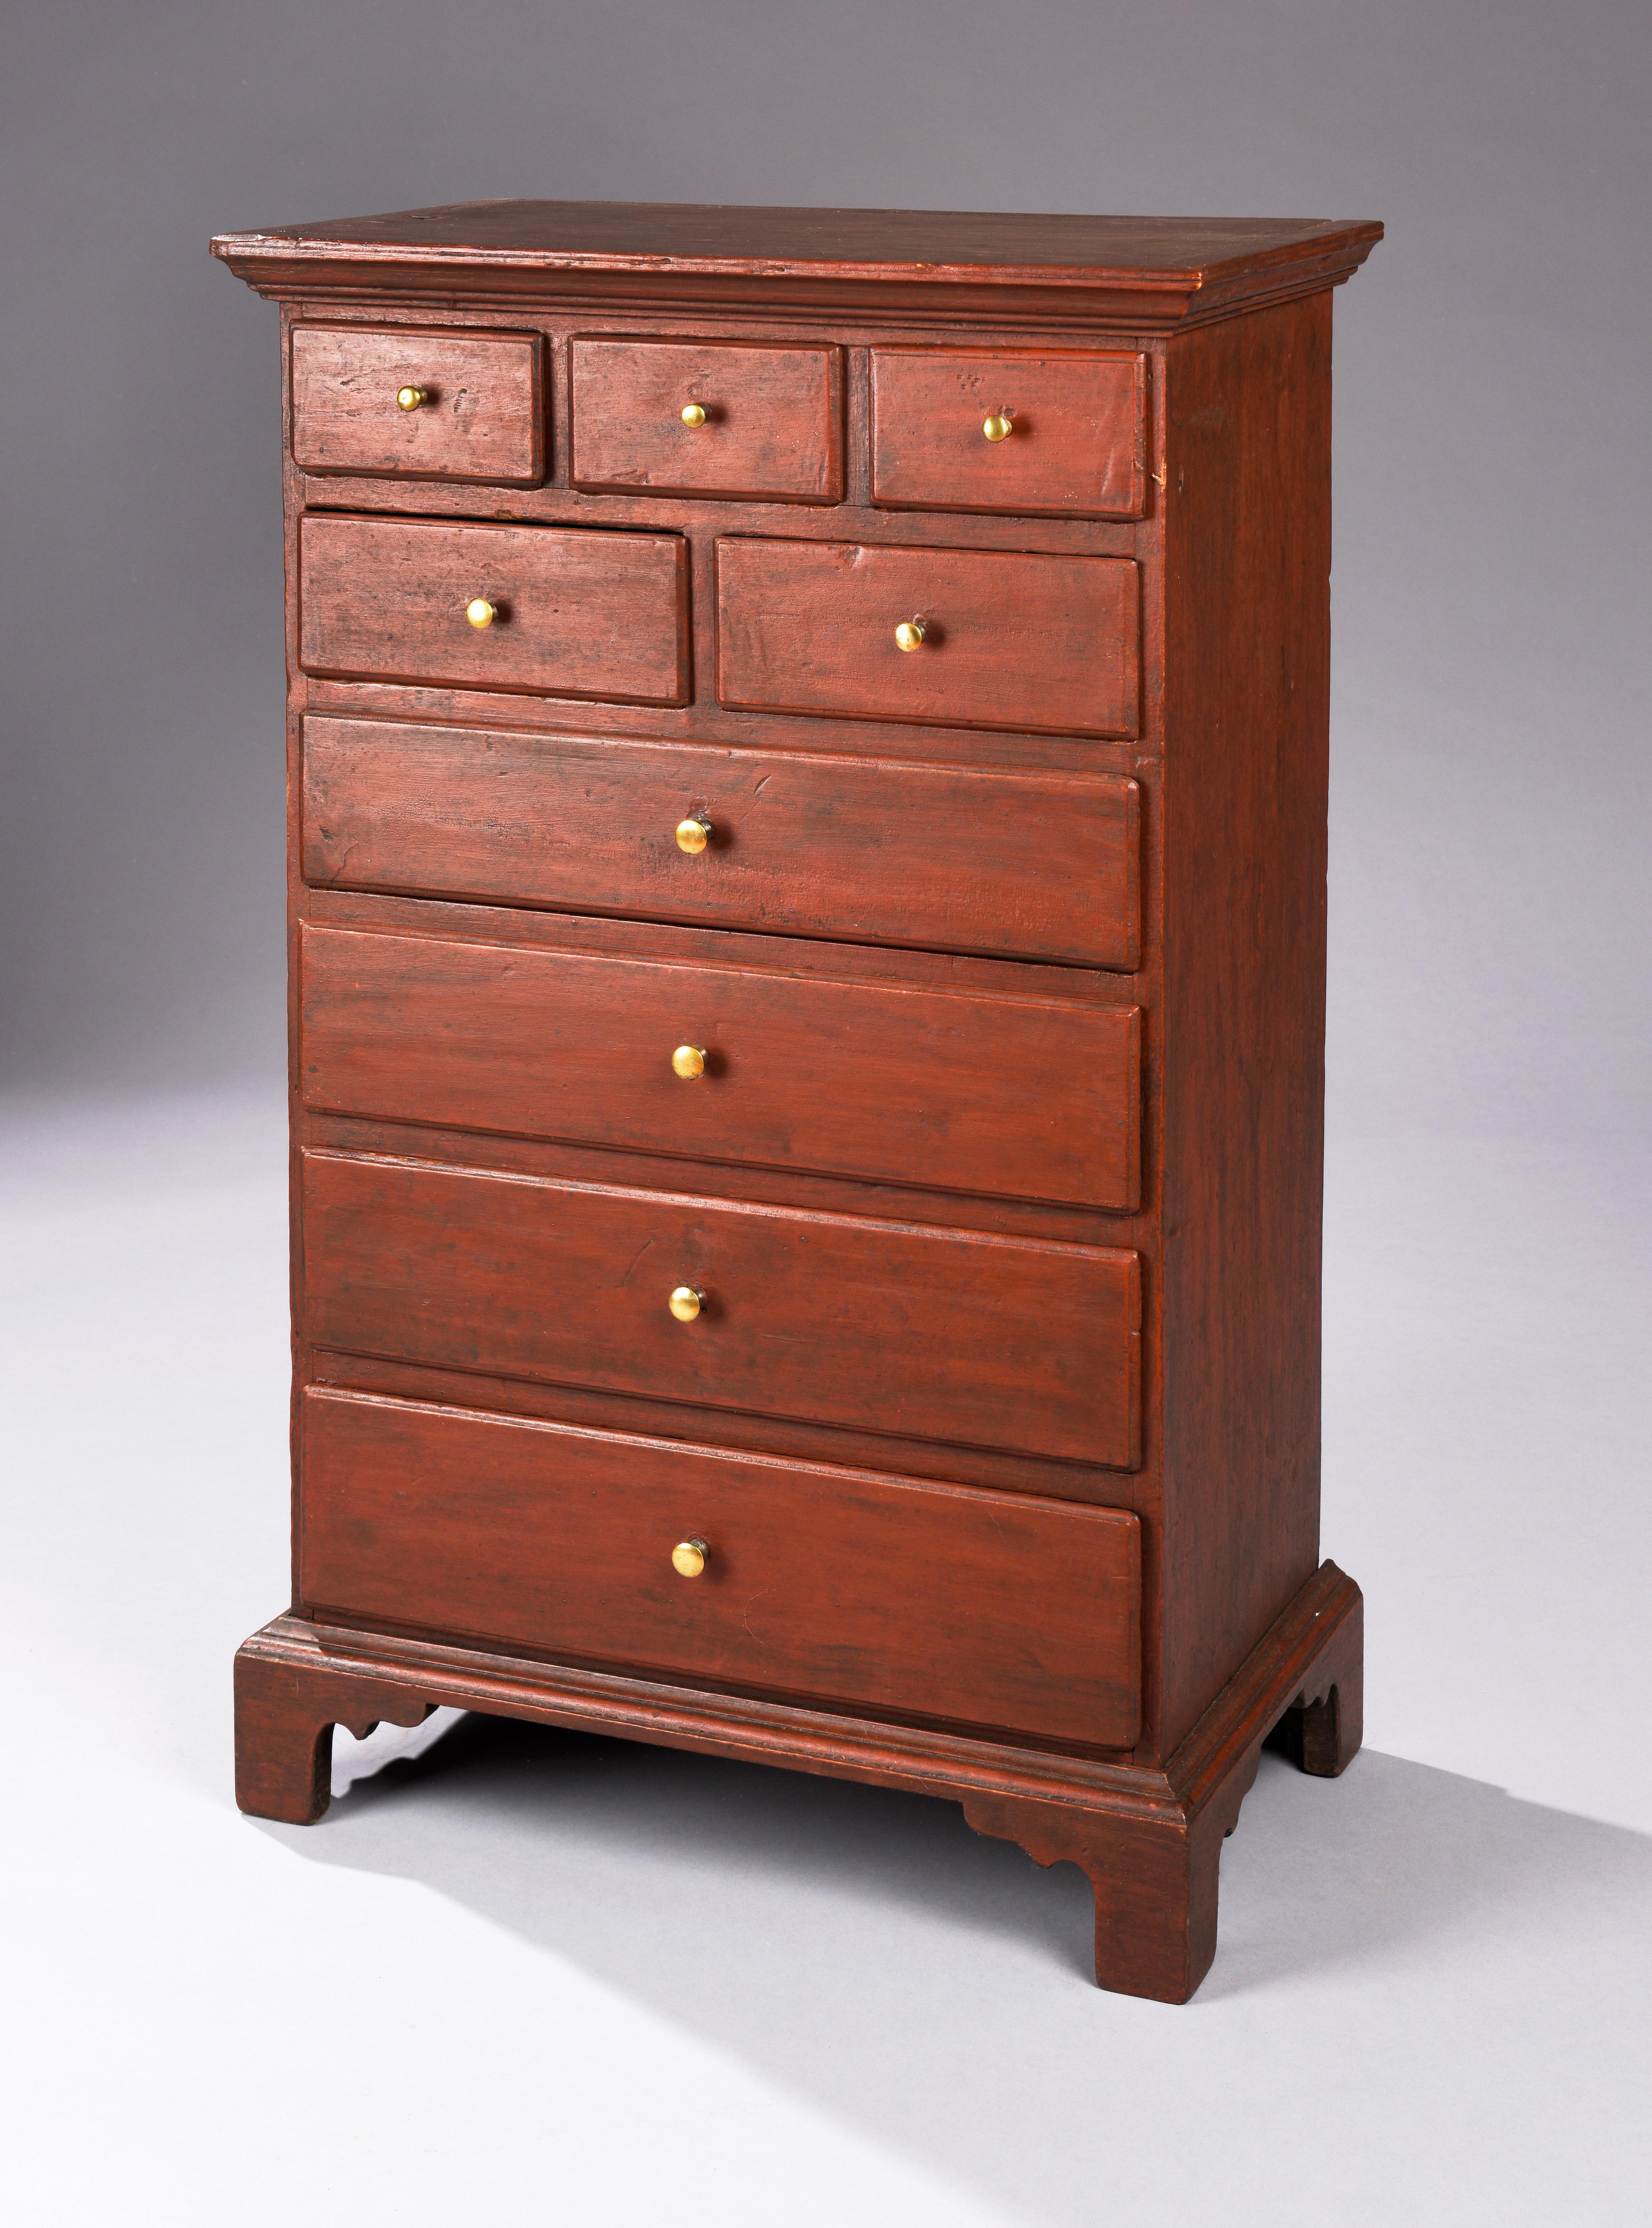 Delightful child's sized Pennsylvania high chest in red paint. Three over two over four drawer arrangement and resting on bracket feet, circa 1800. Tulip poplar.